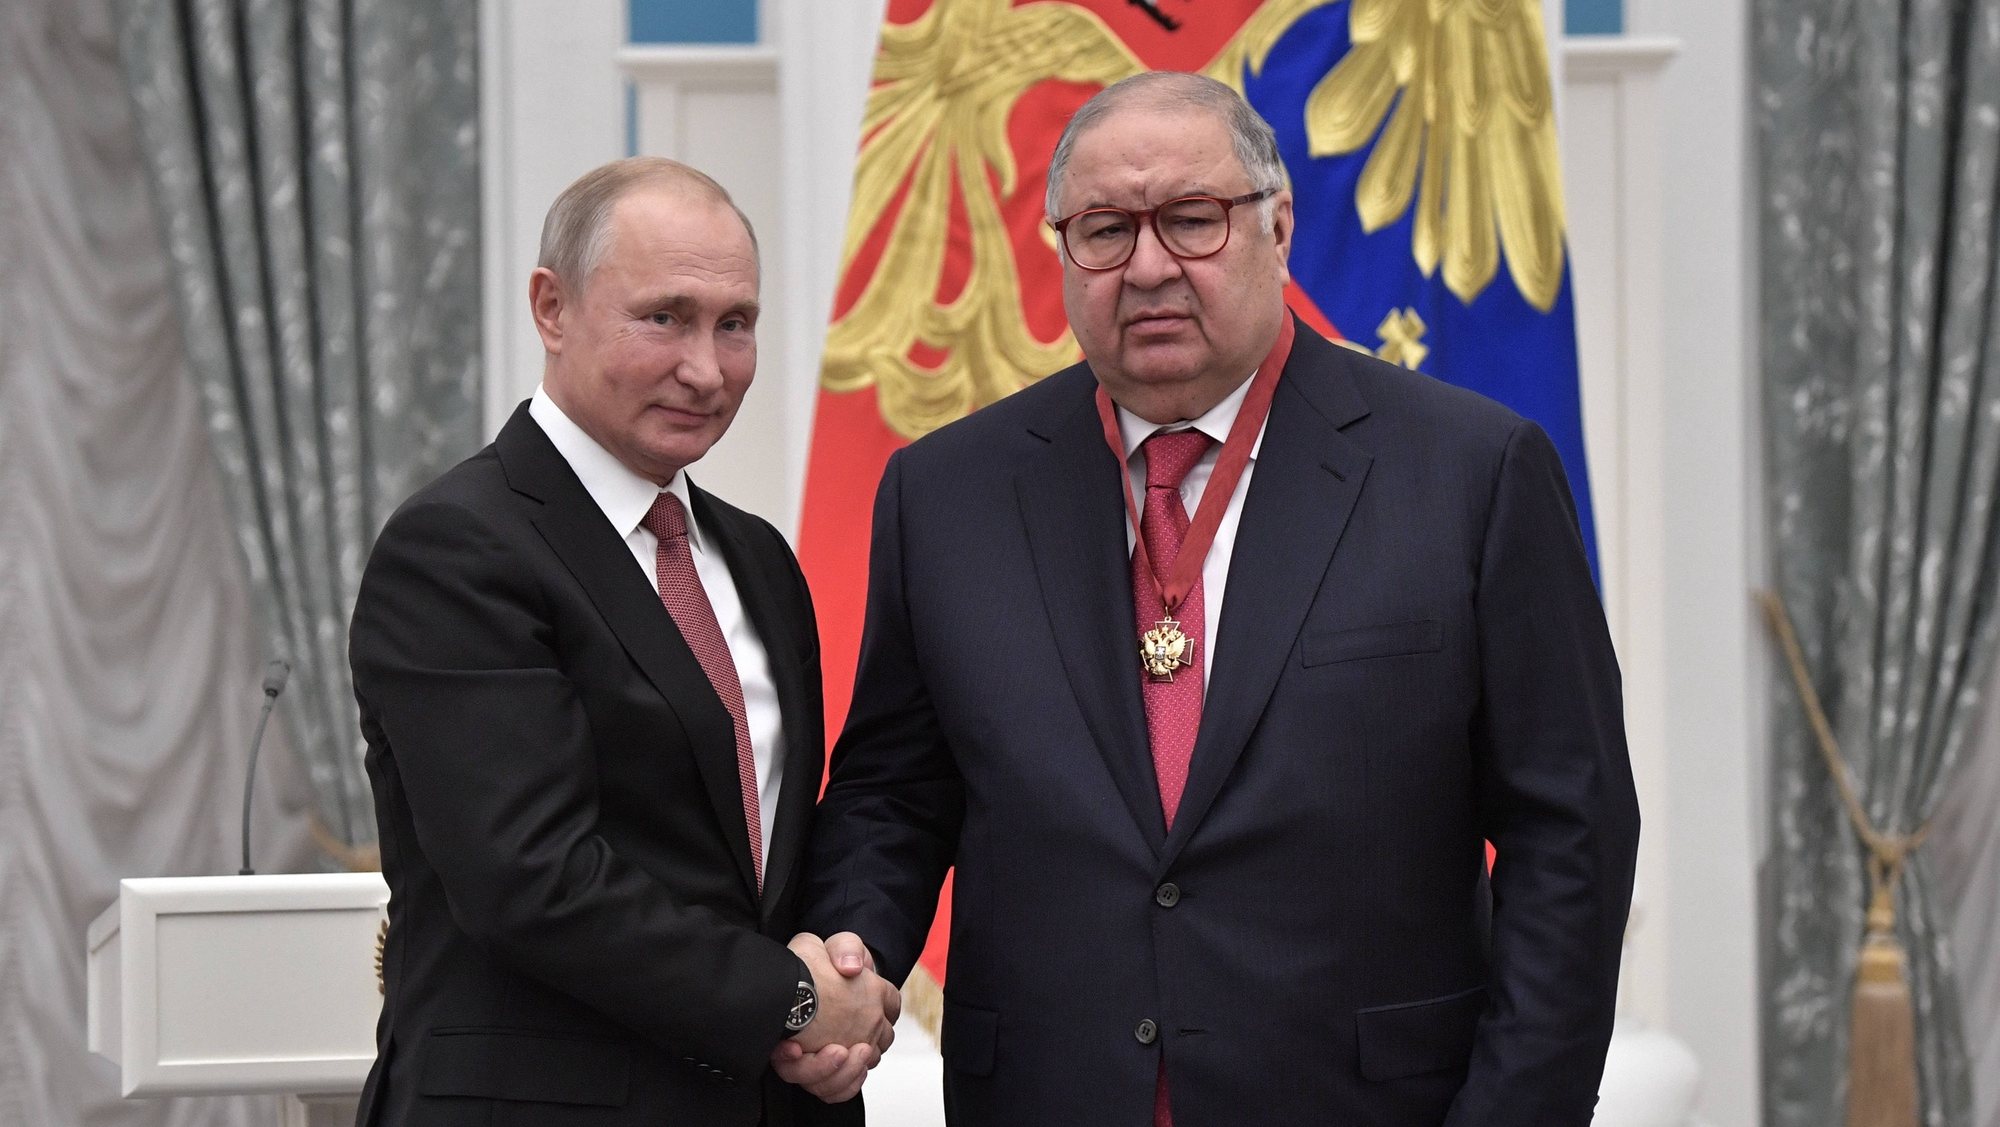 epa07192934 Russian President Vladimir Putin (L) shakes hands with Russian billionaire tycoon, USM Holding founder Alisher Usmanov (R) during a state awards ceremony  at the St. Catherine Hall in the Kremlin in Moscow, Russia, 27 November 2018. Alisher Usmanov was awarded with the 3rd degree Order For Merit to the Fatherland.  EPA/ALEXEY NIKOLSKY / SPUTNIK / KREMLIN POOL MANDATORY CREDIT